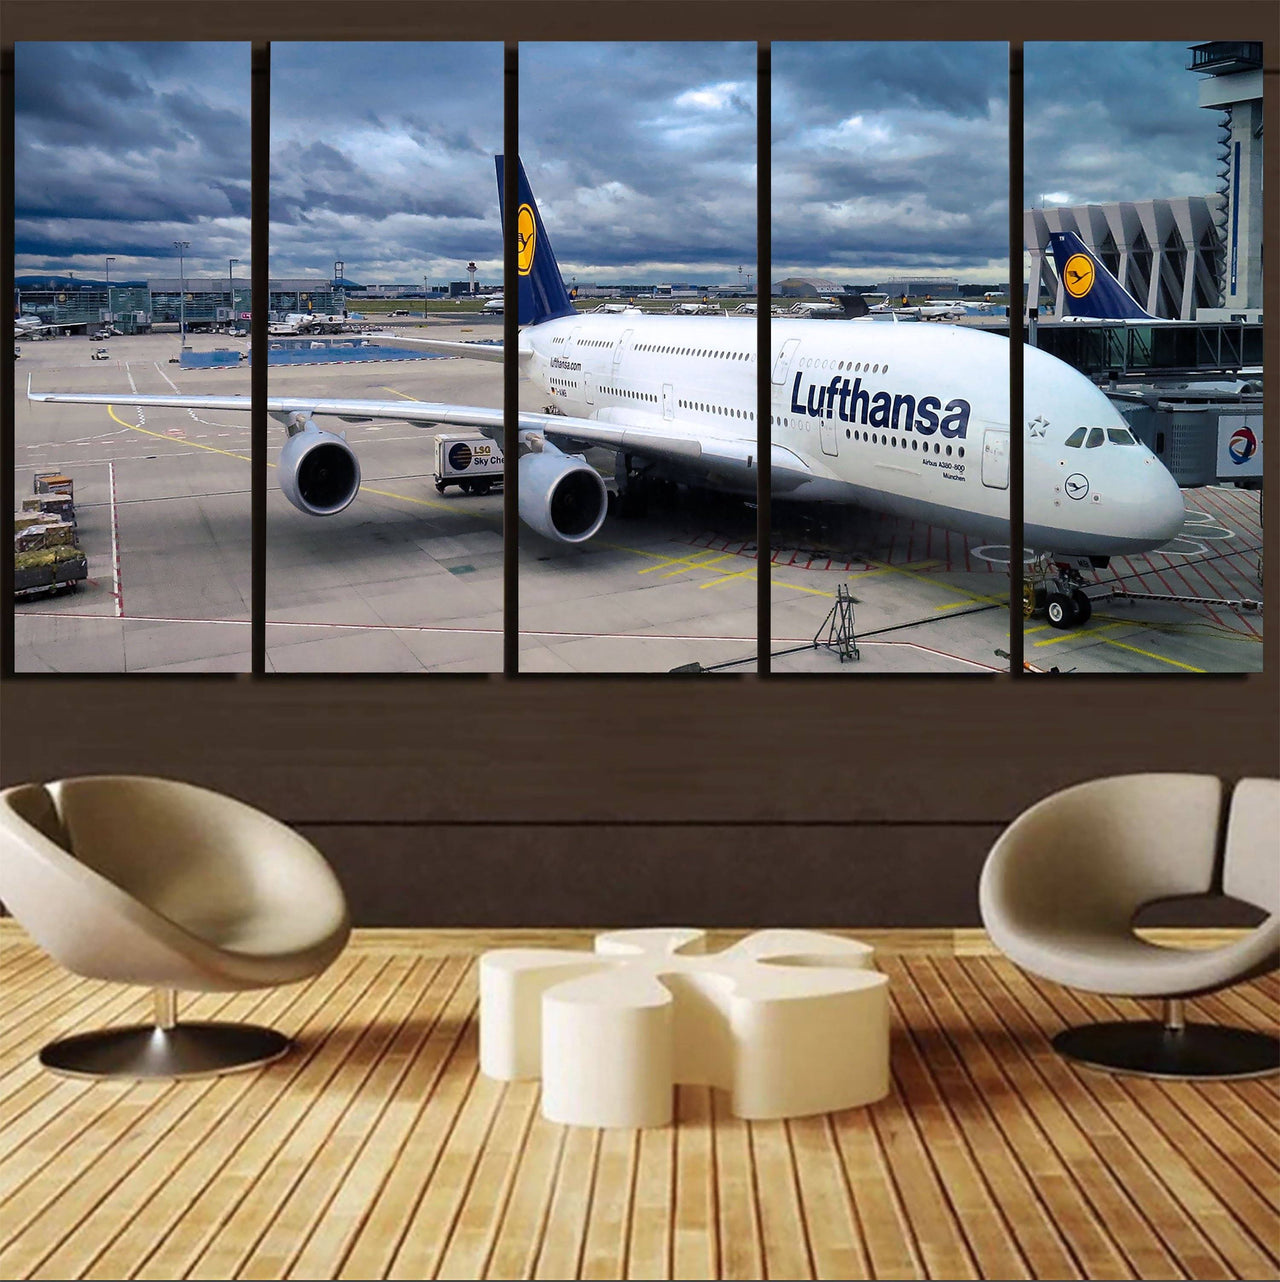 Lufthansa's A380 At the Gate Printed Canvas Prints (5 Pieces) Aviation Shop 